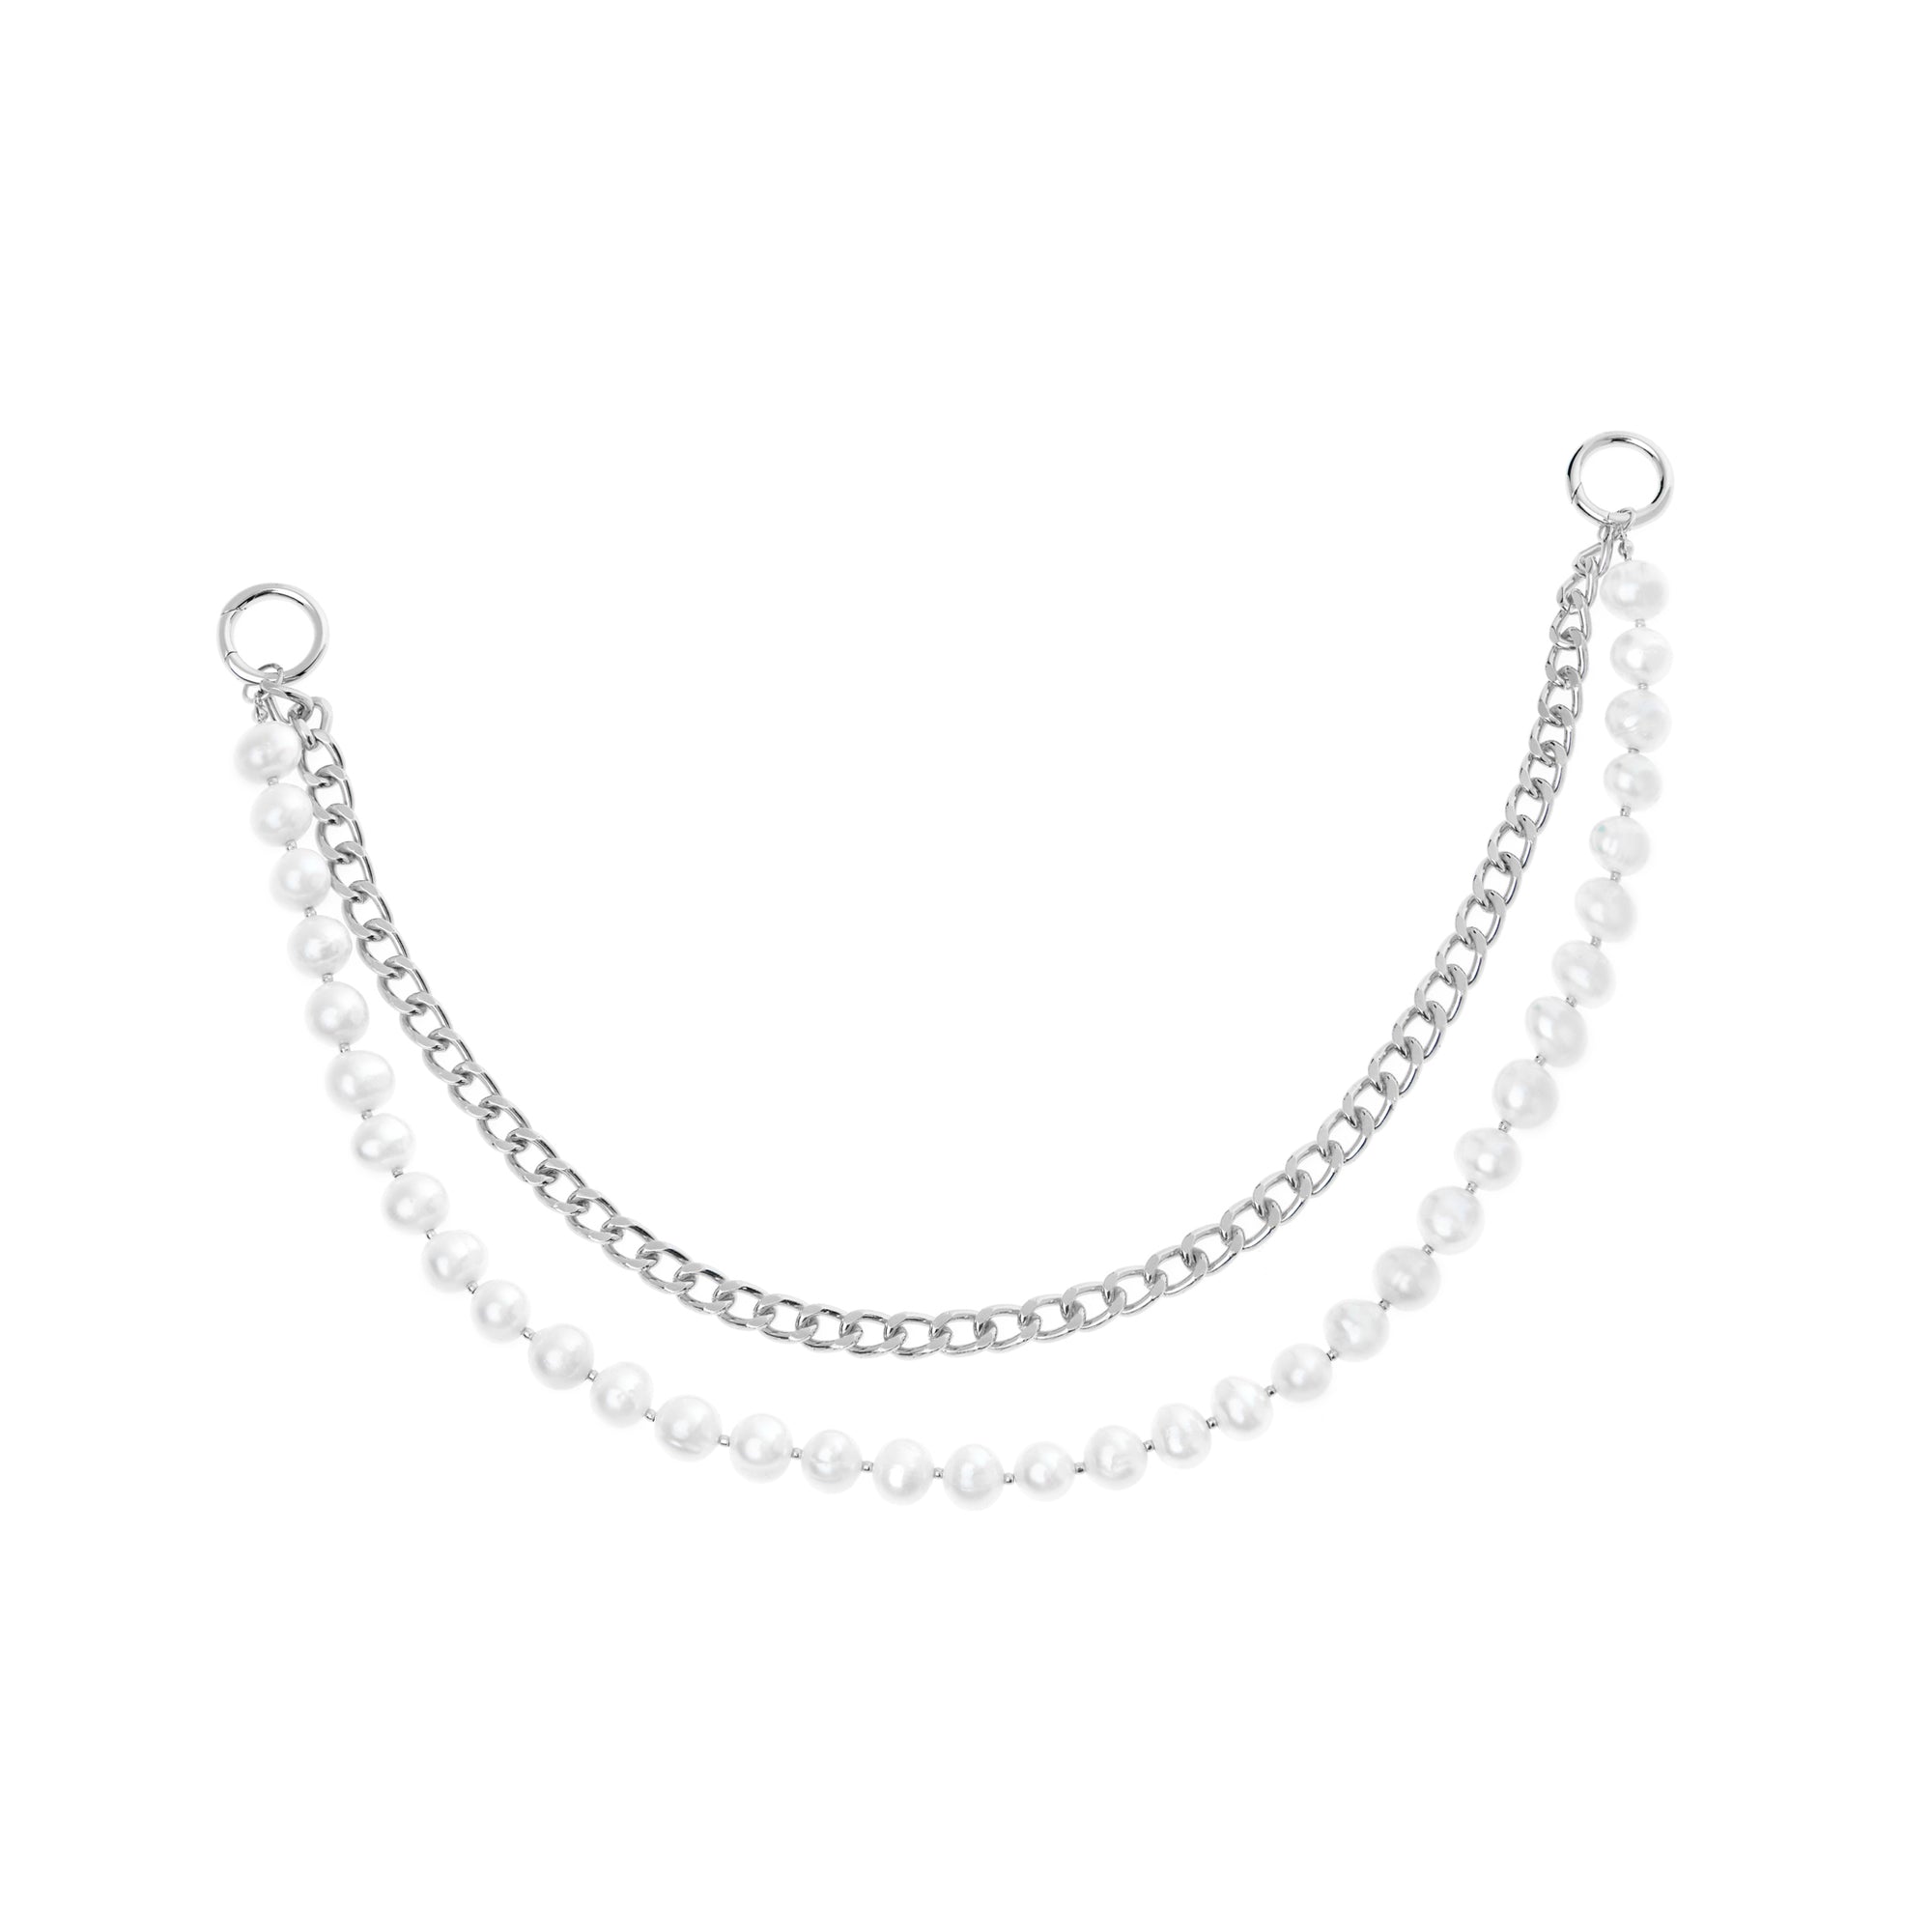 Body Chain 'Be Gentle' – Silver